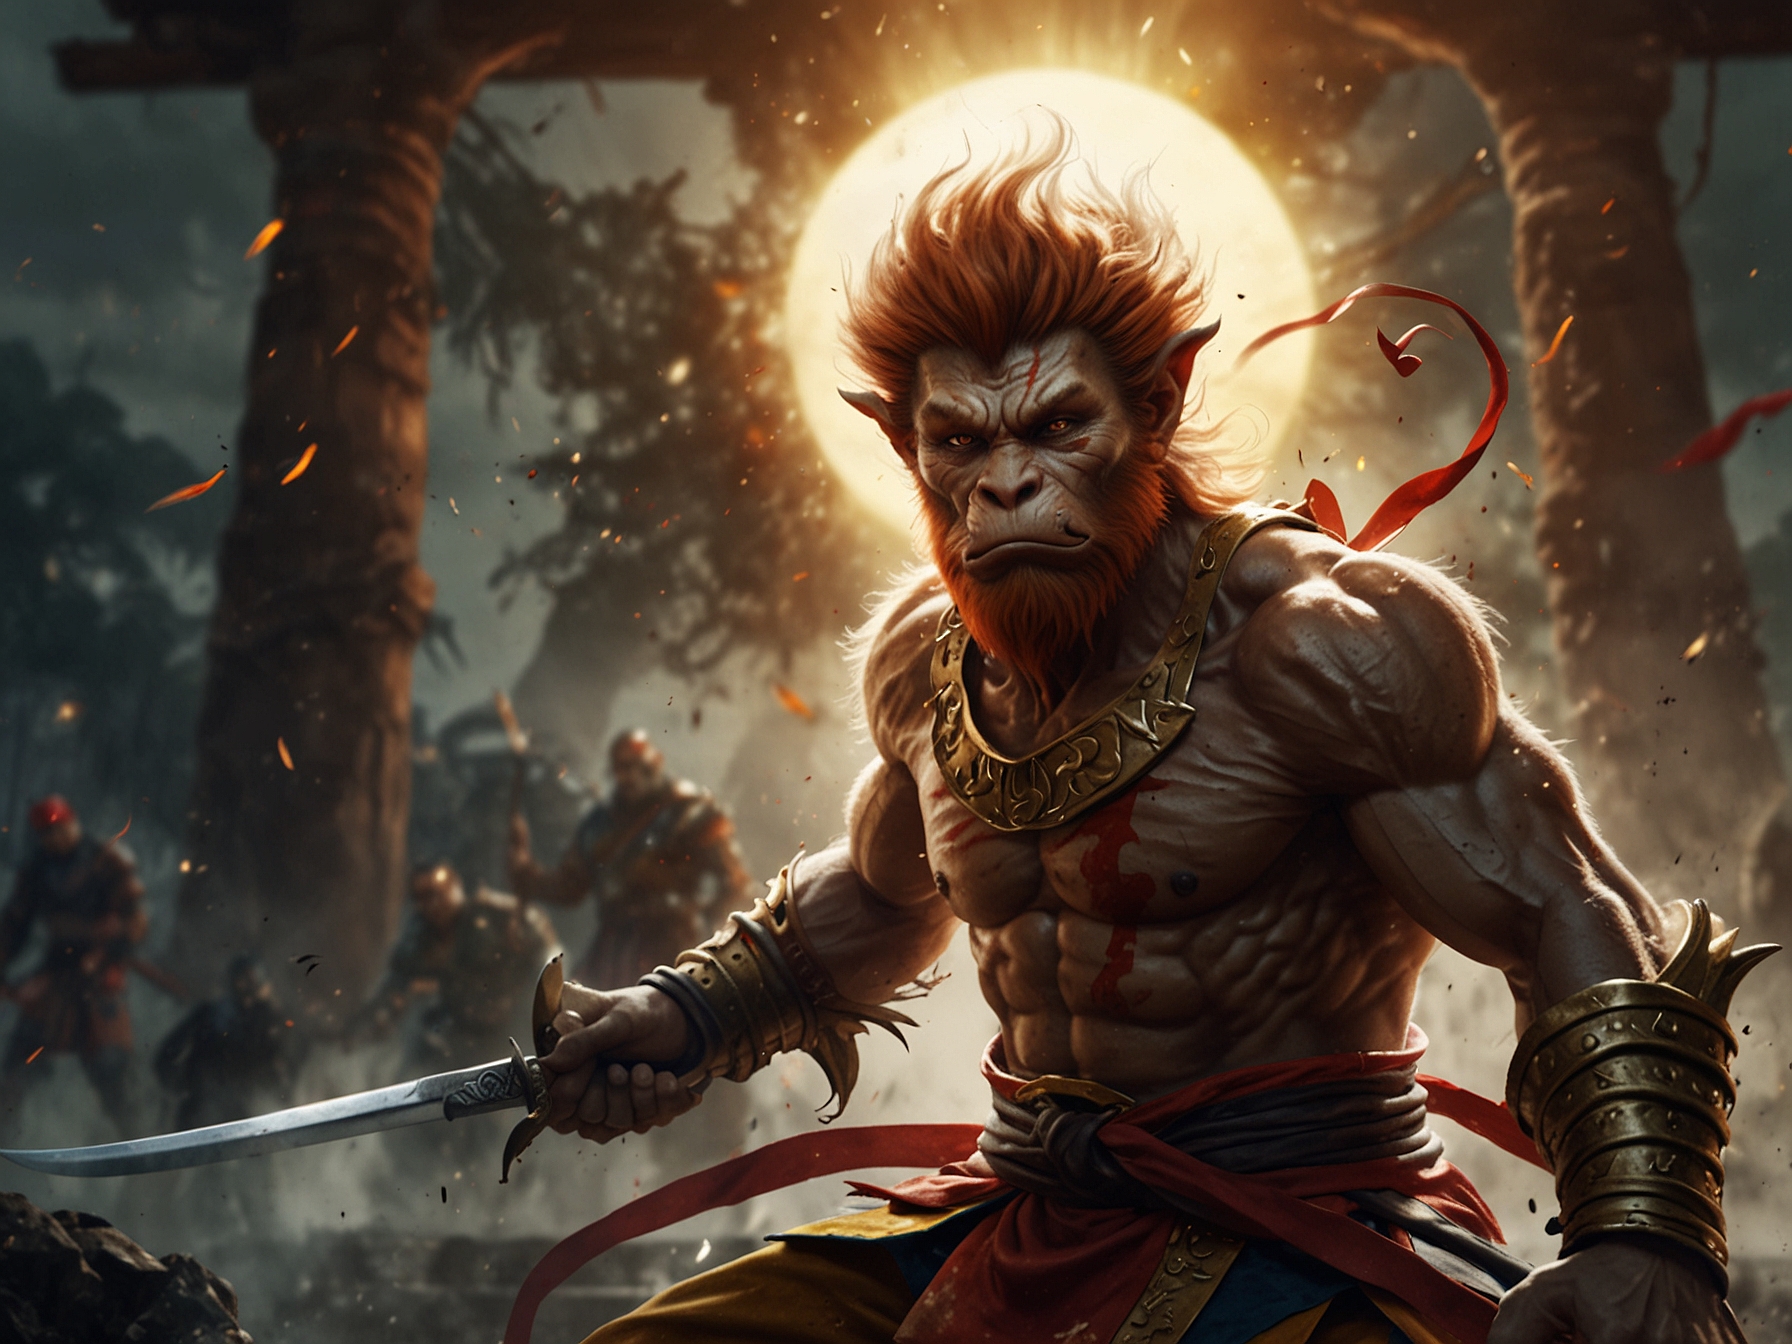 Character Sun Wukong engaging in combat with demon enemies, highlighting the dynamic martial arts and magic combat system.